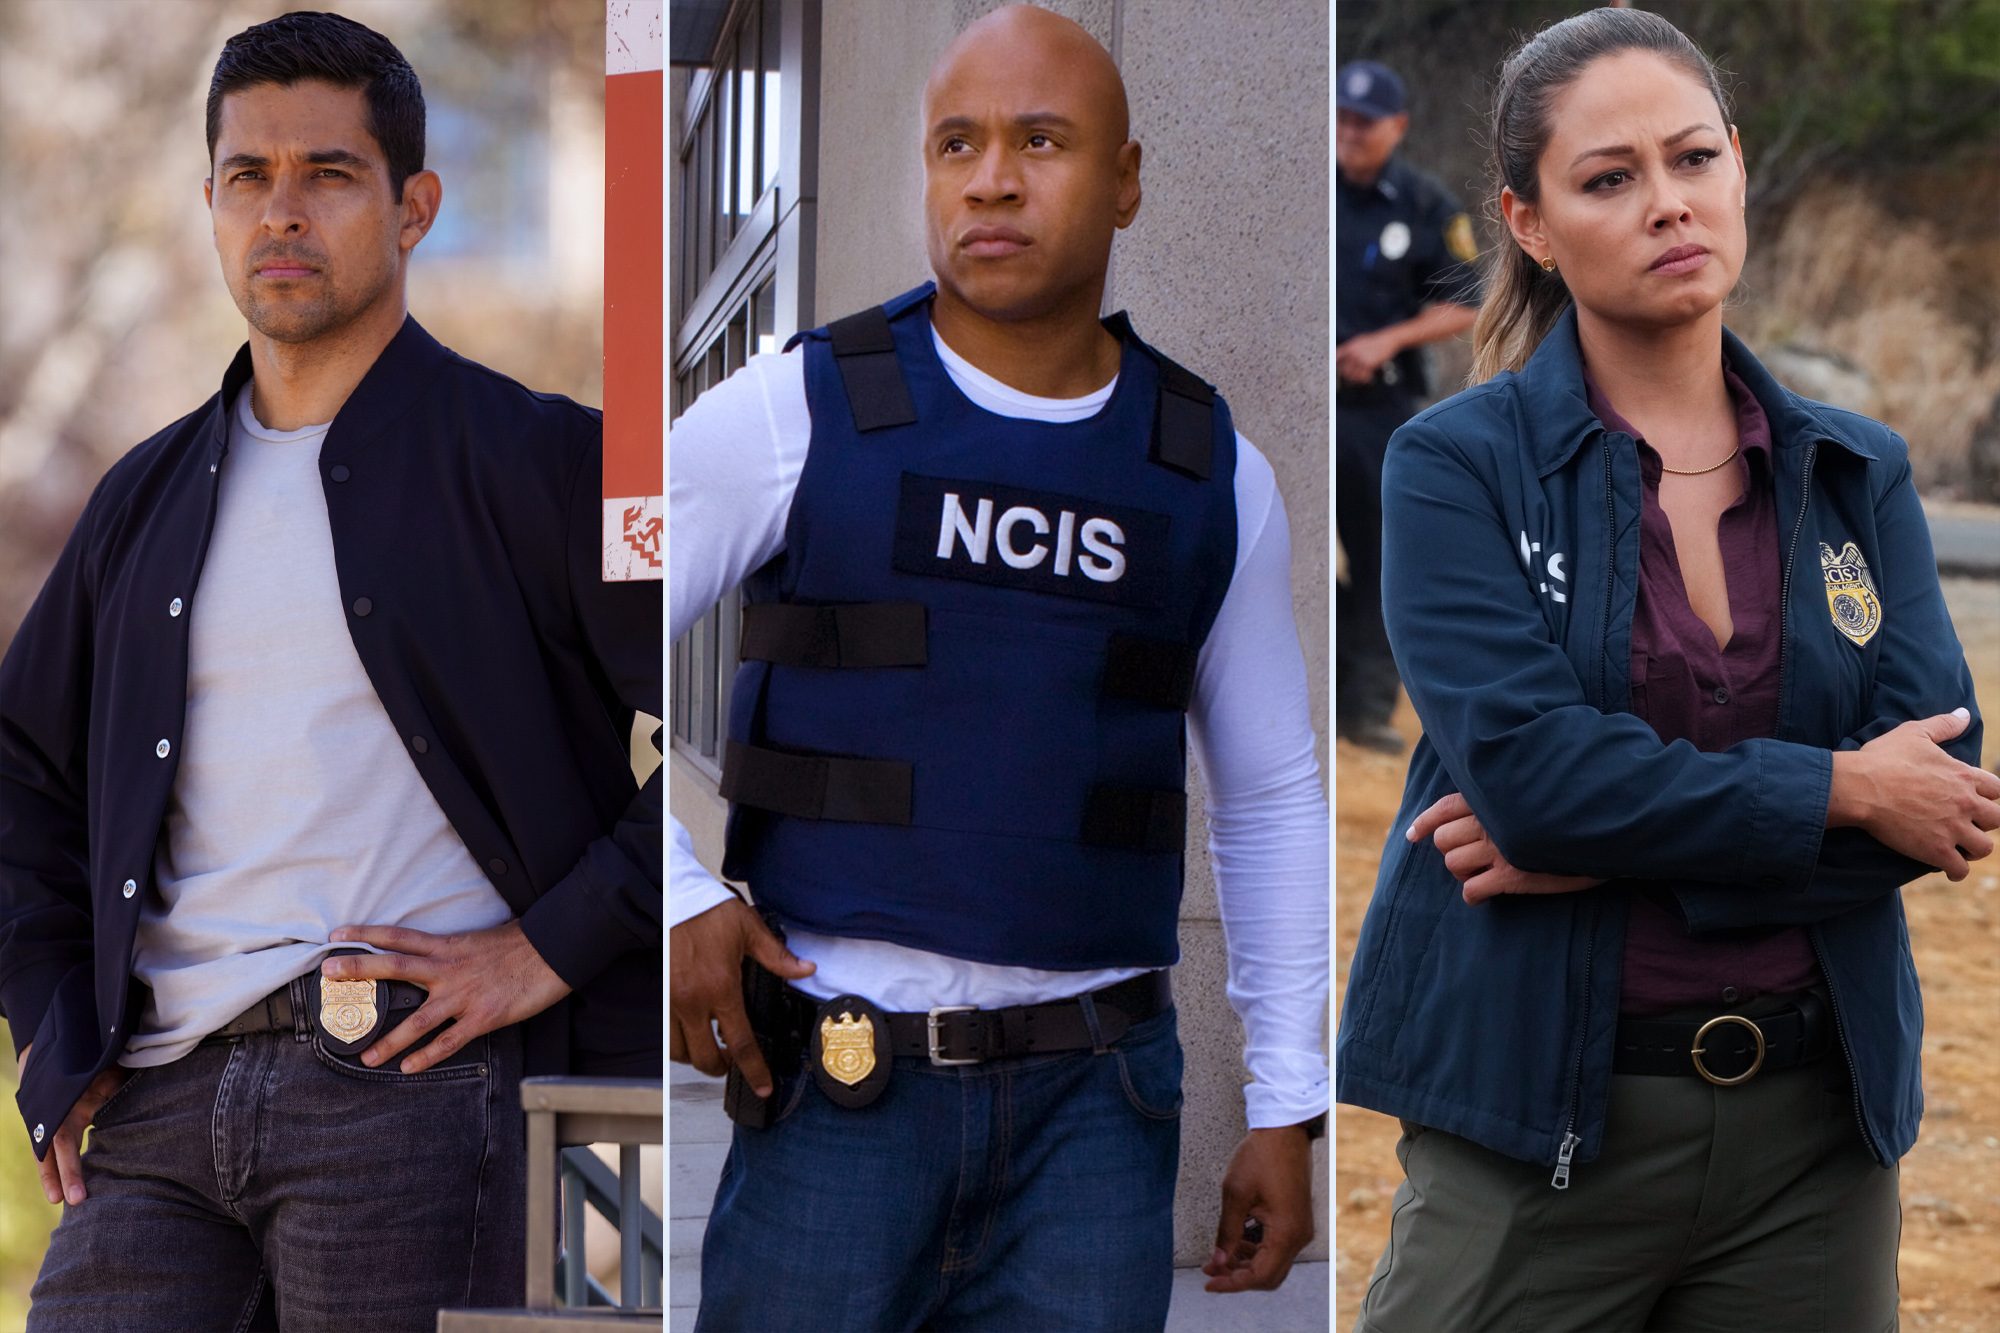 CBS Releases Trailer for First AllIn TeamUp of ‘NCIS’ mxdwn Television